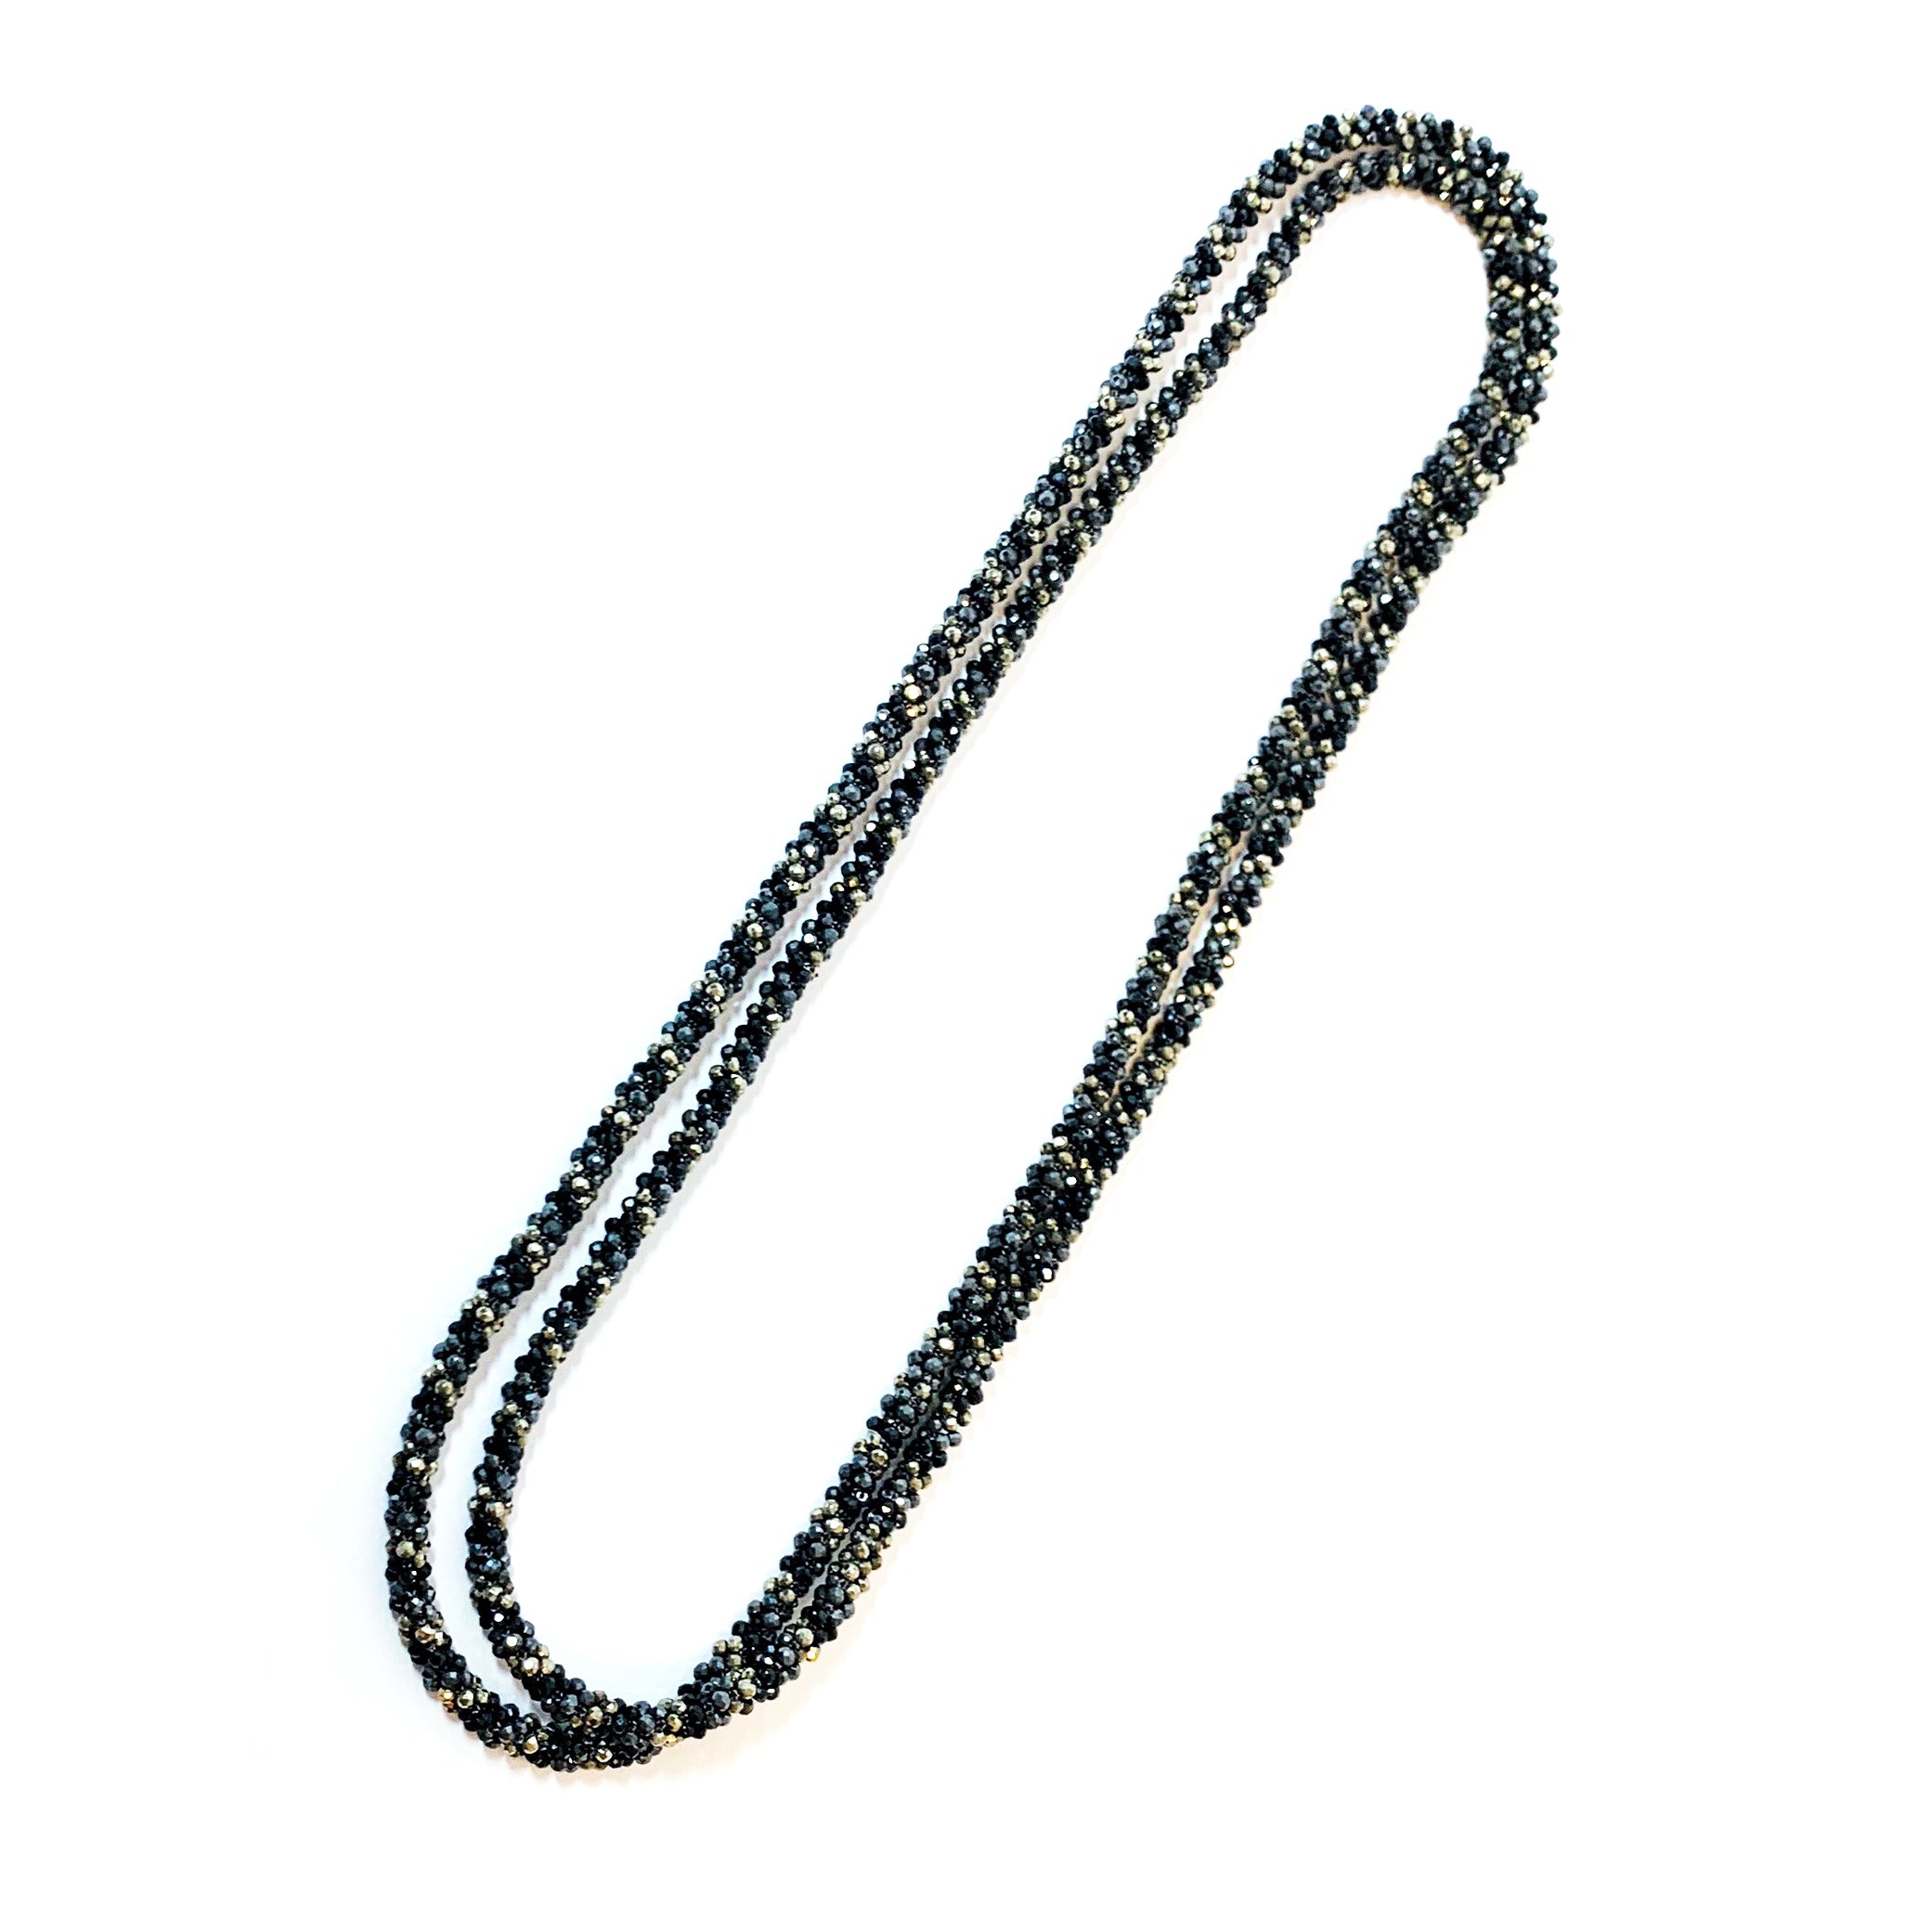 Woven Necklace - Spinel, Hematite and Pyrite